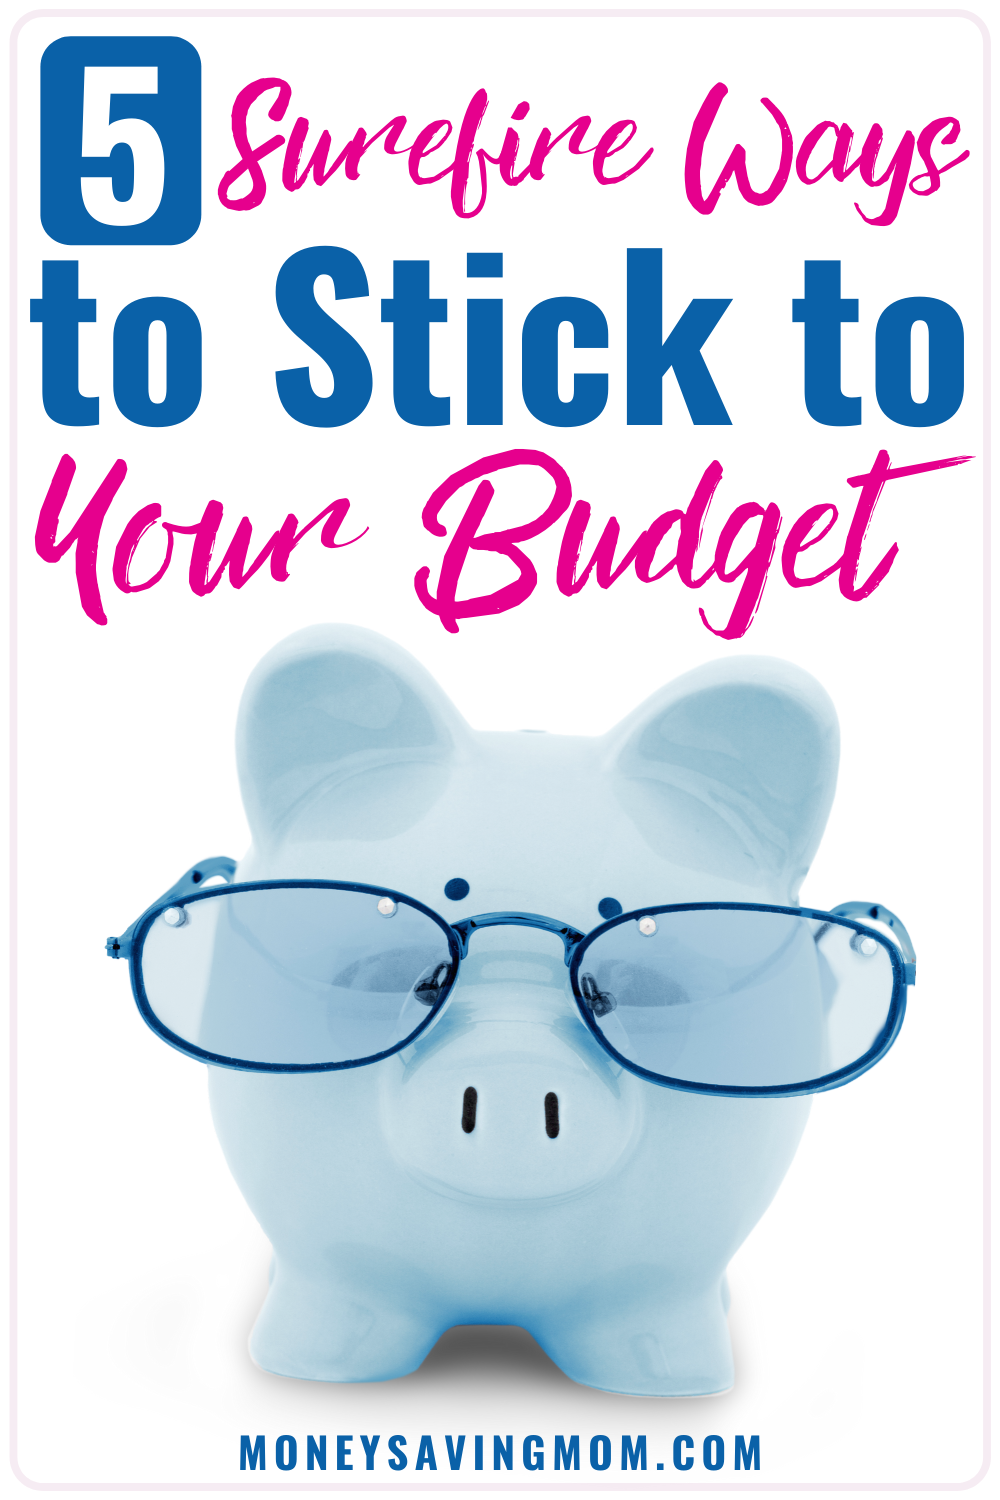 How to Stick to Your budget